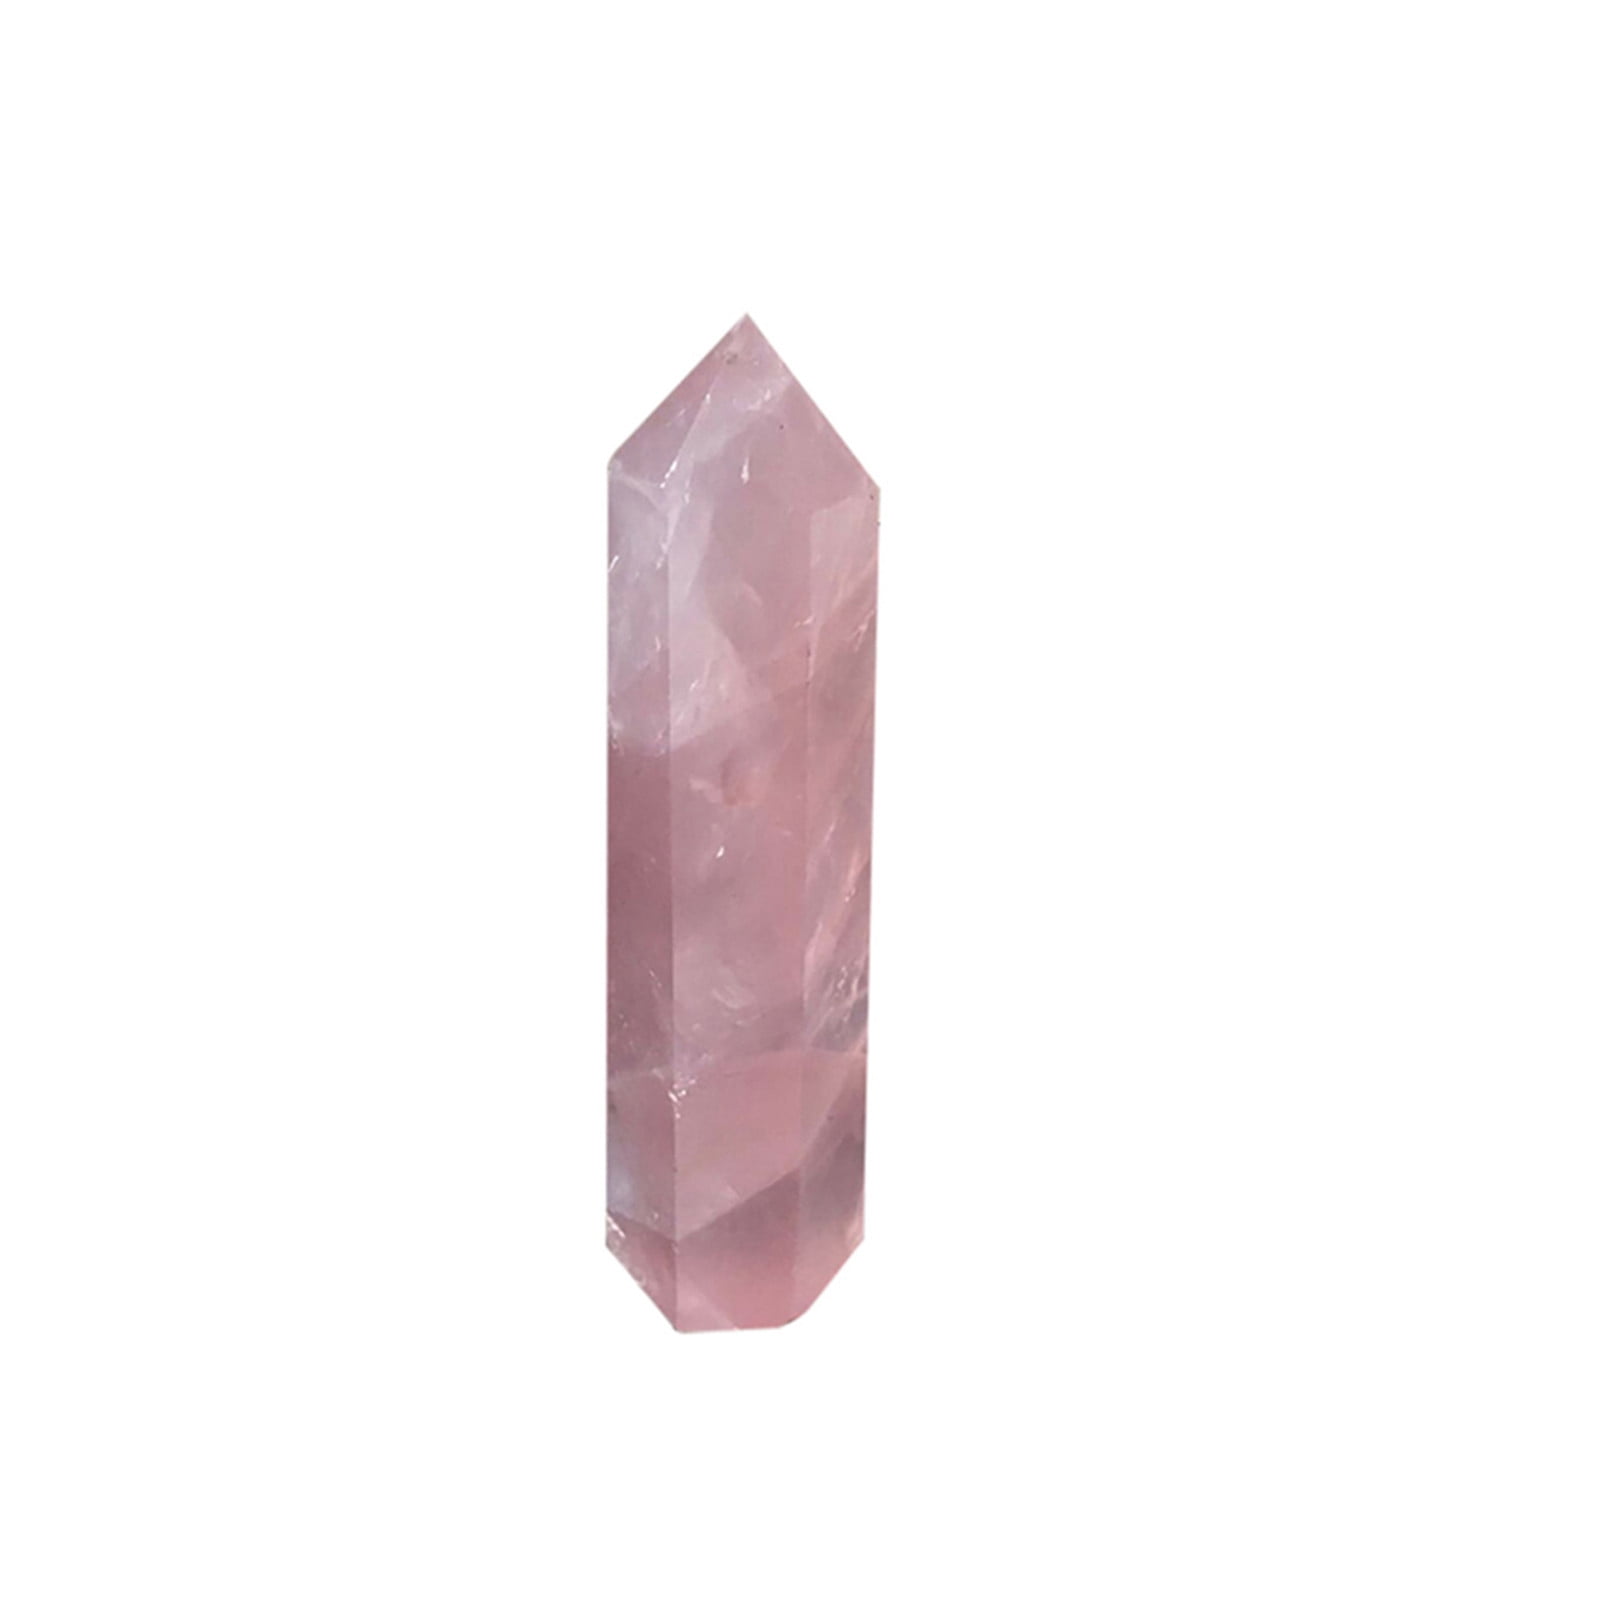 100% Natural Pink Rose Quartz Crystal Wand Point Healing Stone 50-60MM Gift 